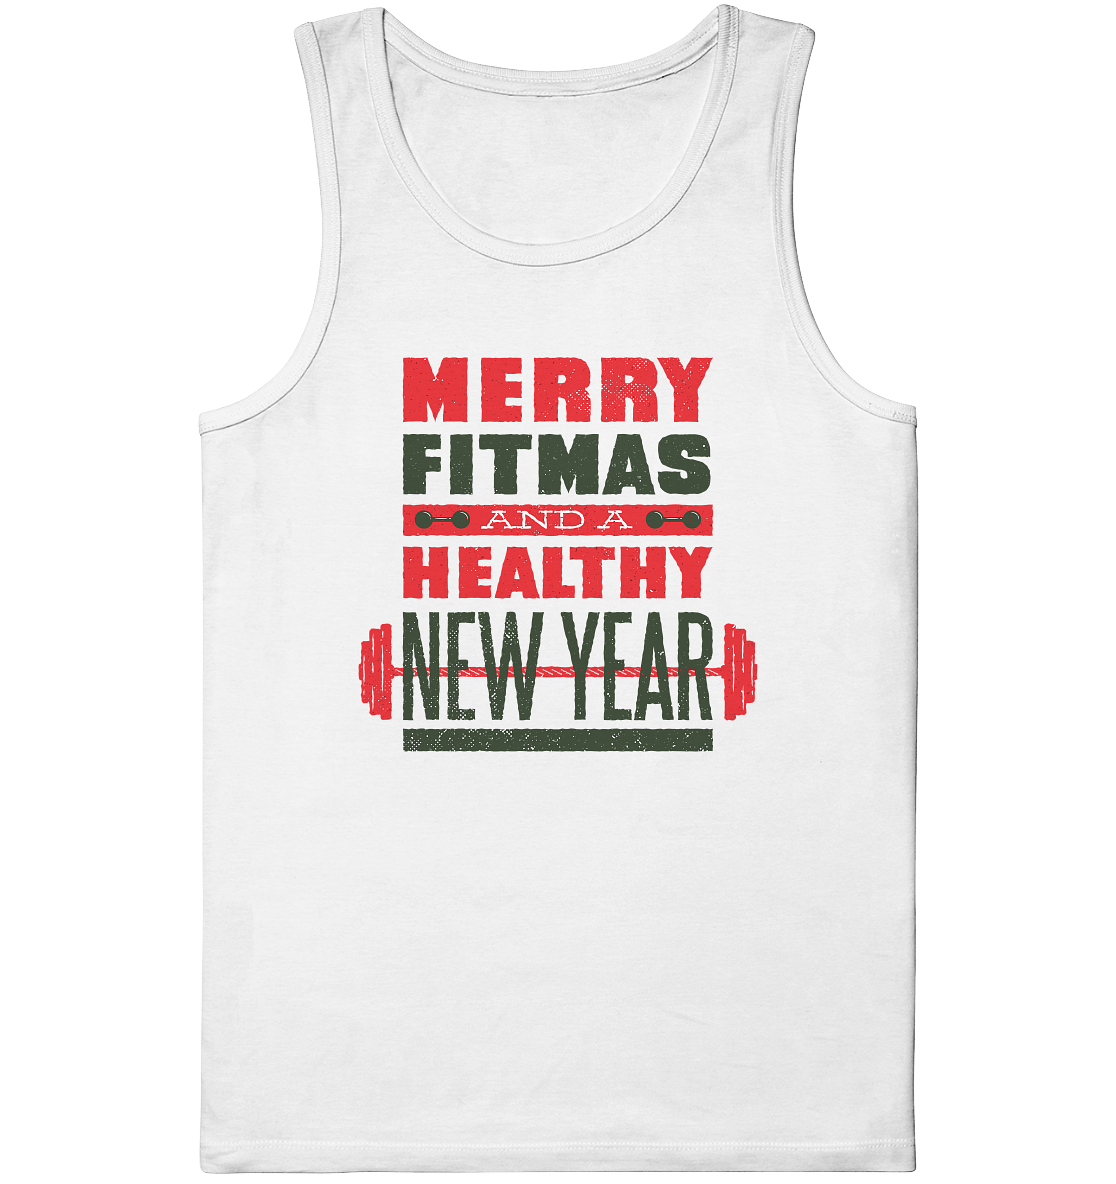 Christmas design, Gym, Merry Fitmas and a Healthy New Year - Organic tank top